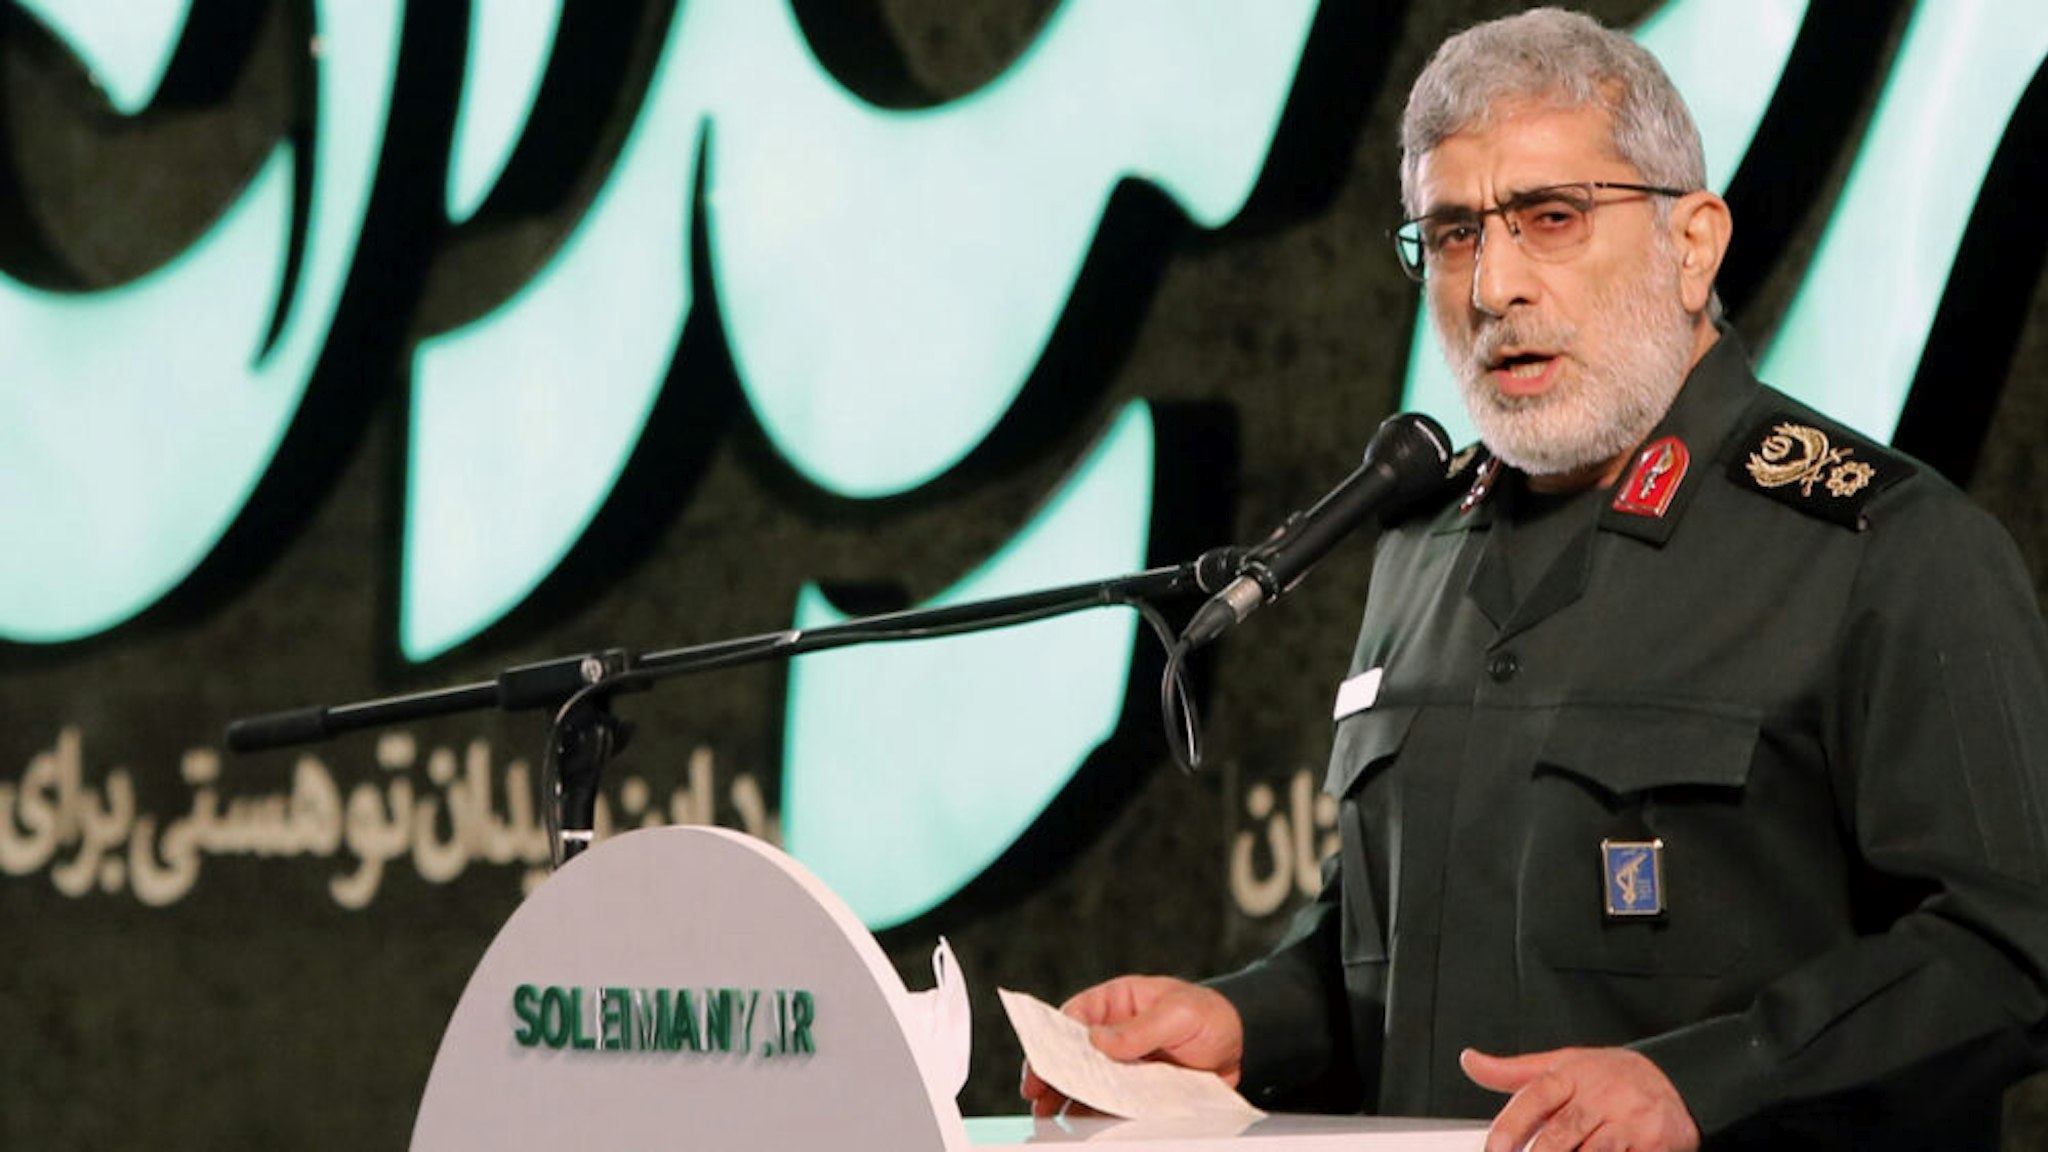 Iranian Quds force commander Esmail Ghaani speaks during a ceremony on the occasion of the first anniversary of death of former Iran's Quds force commander Qasem Soleimani in Tehran, on January 1, 2021. - Iran's judiciary chief Ebrahim Raisi warned that Qasem Soleimani's killers will "not be safe on Earth", as the Islamic republic began marking the first anniversary of the top general's assassination in a US strike.